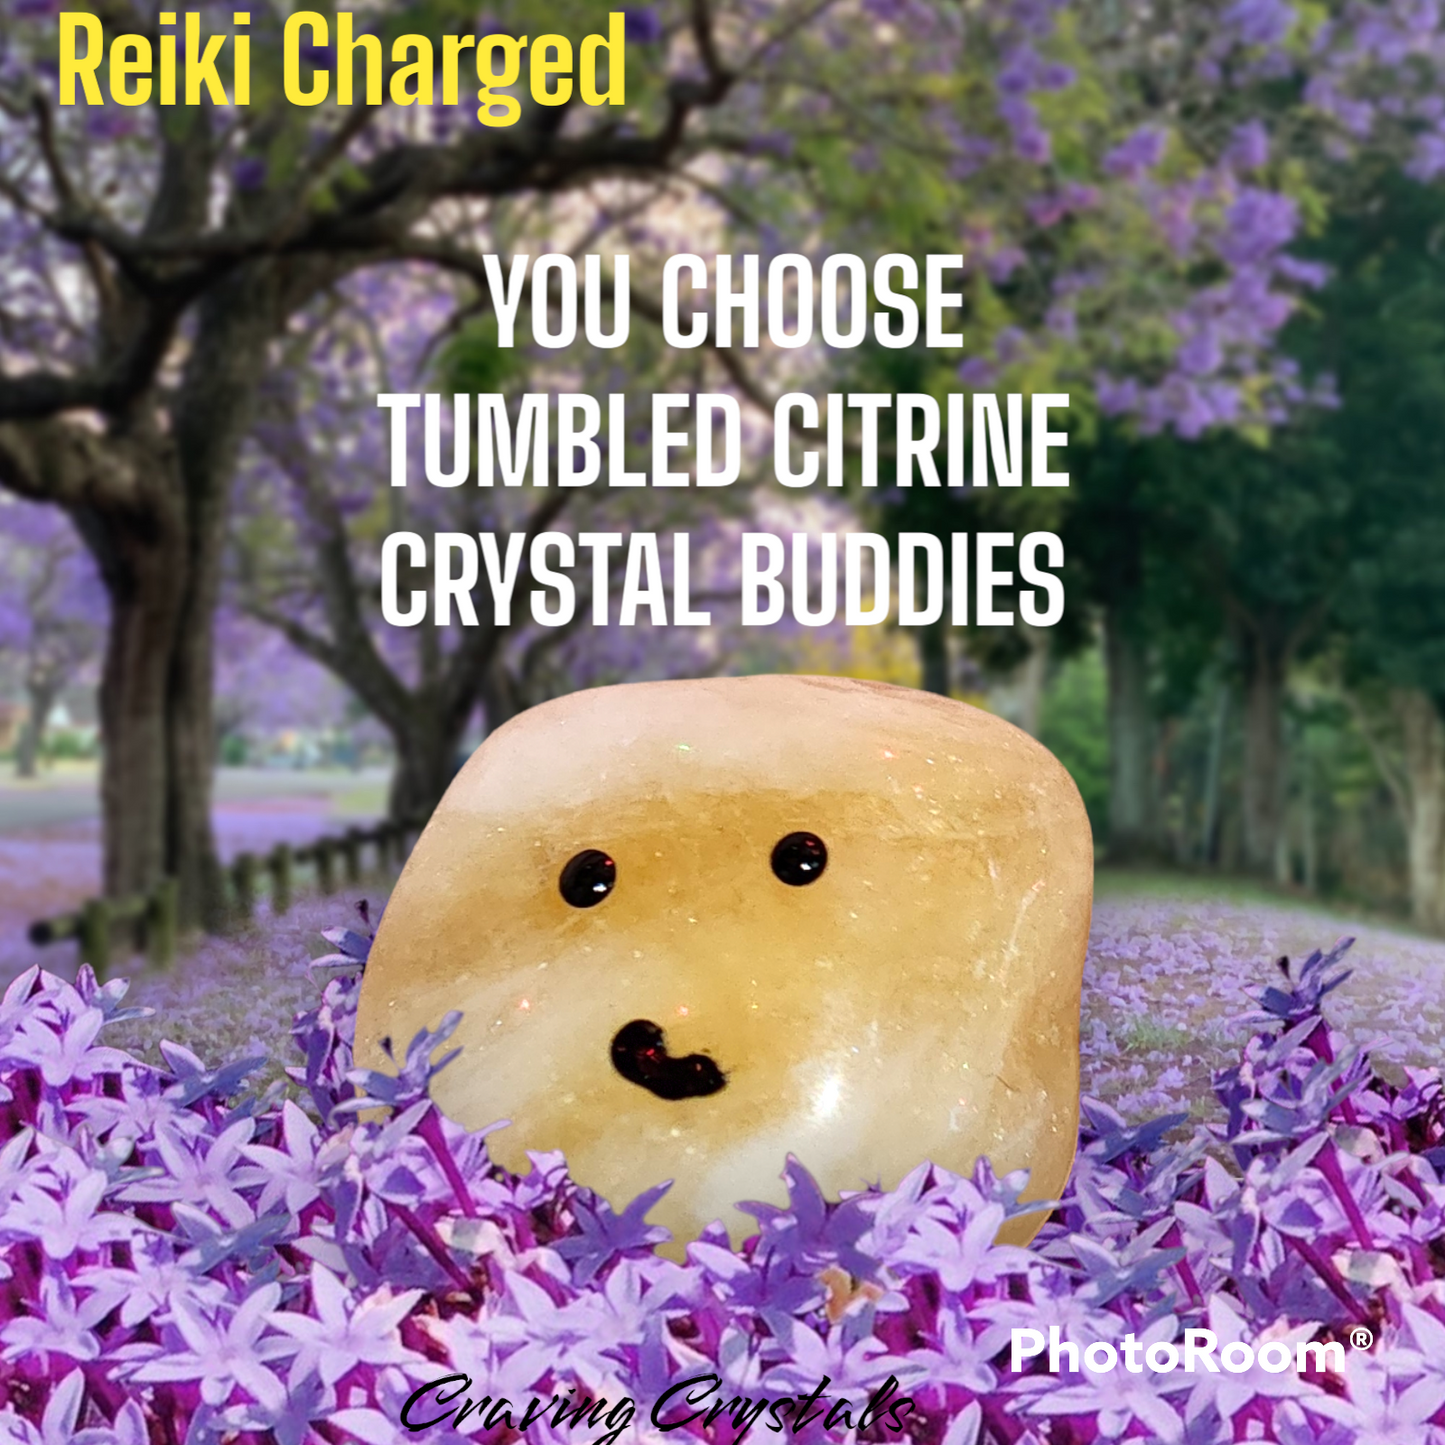 Tumbled Citrine Palm & Pocket Pals | Reiki Charged | YOU CHOOSE